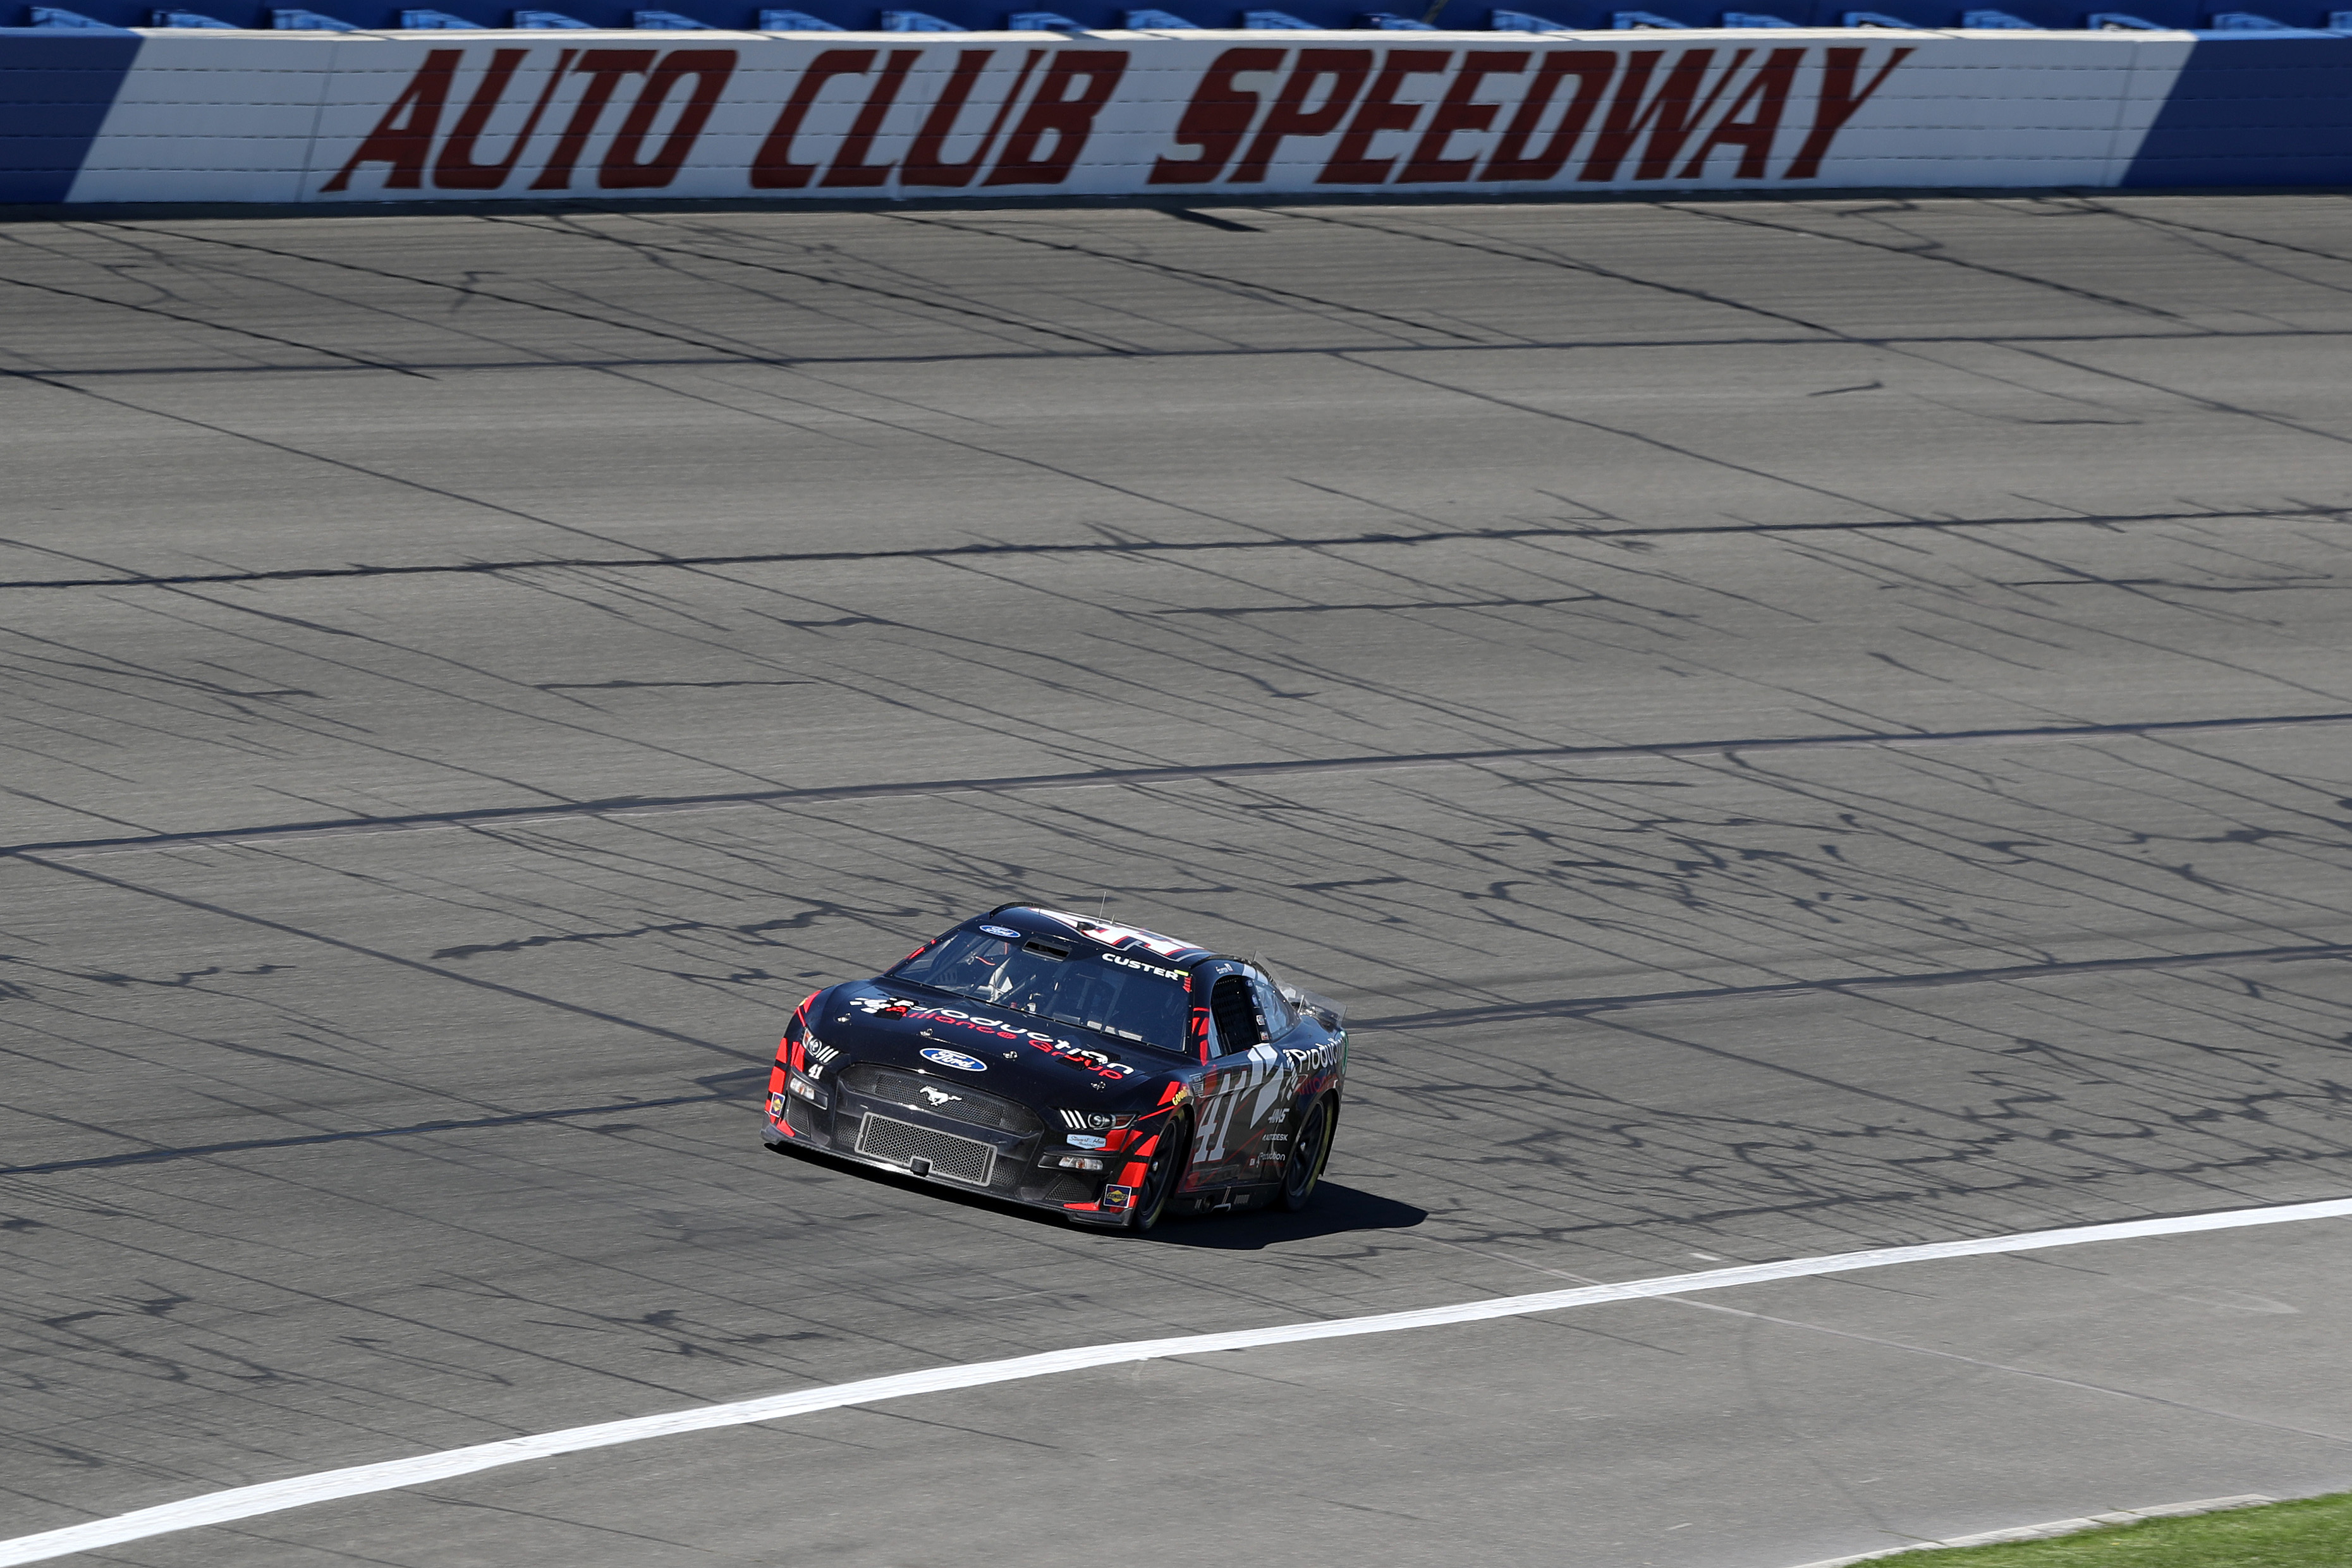 Cole Custer, driver of the #41 Production Alliance Group Ford, drives during qualifying for the NASCAR Cup Series Wise Power 400 at Auto Club Speedway on February 26, 2022 in Fontana, California.